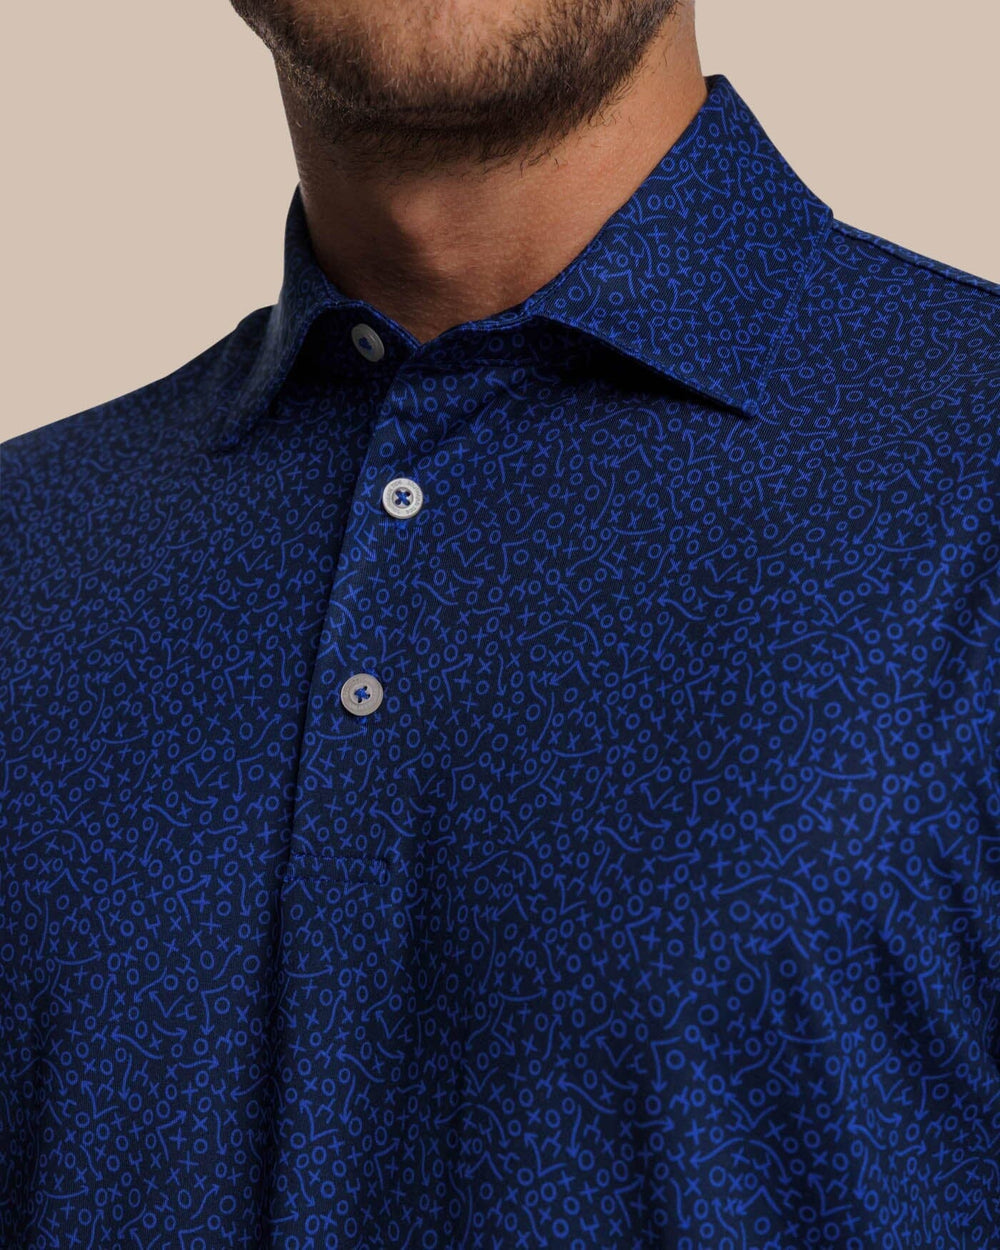 The detail view of the Southern Tide Driver Gameplay Polo by Southern Tide - Navy